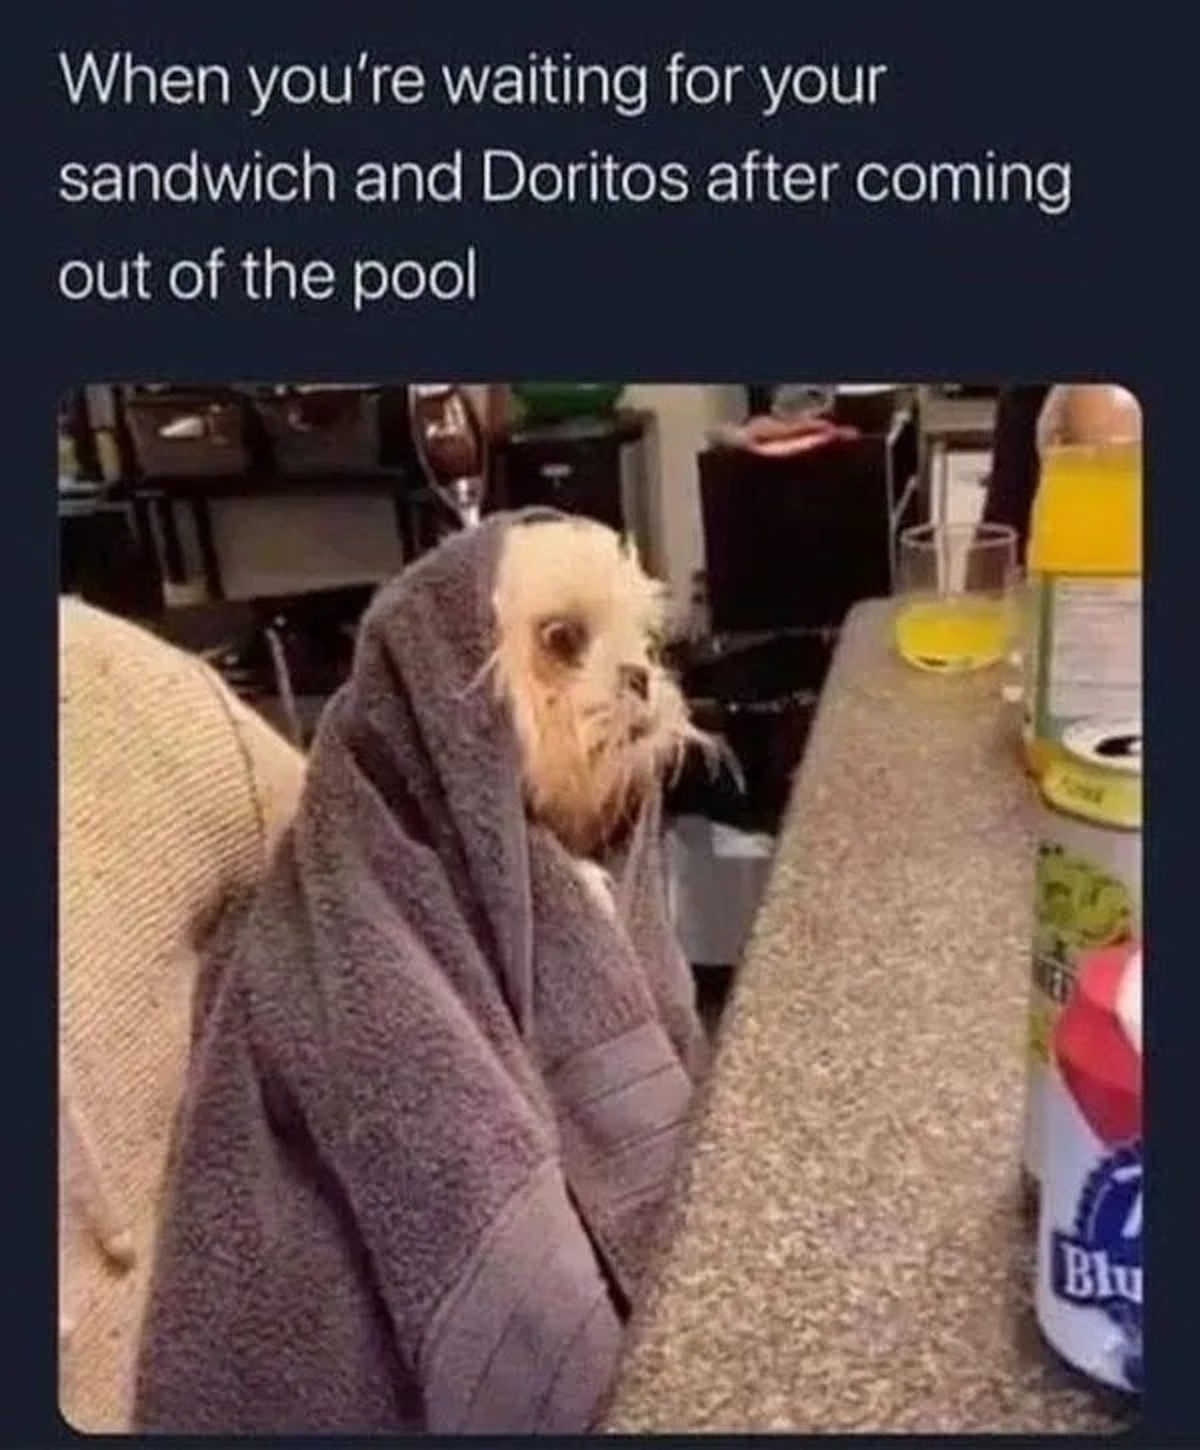 labradoodle - When you're waiting for your sandwich and Doritos after coming out of the pool Blu